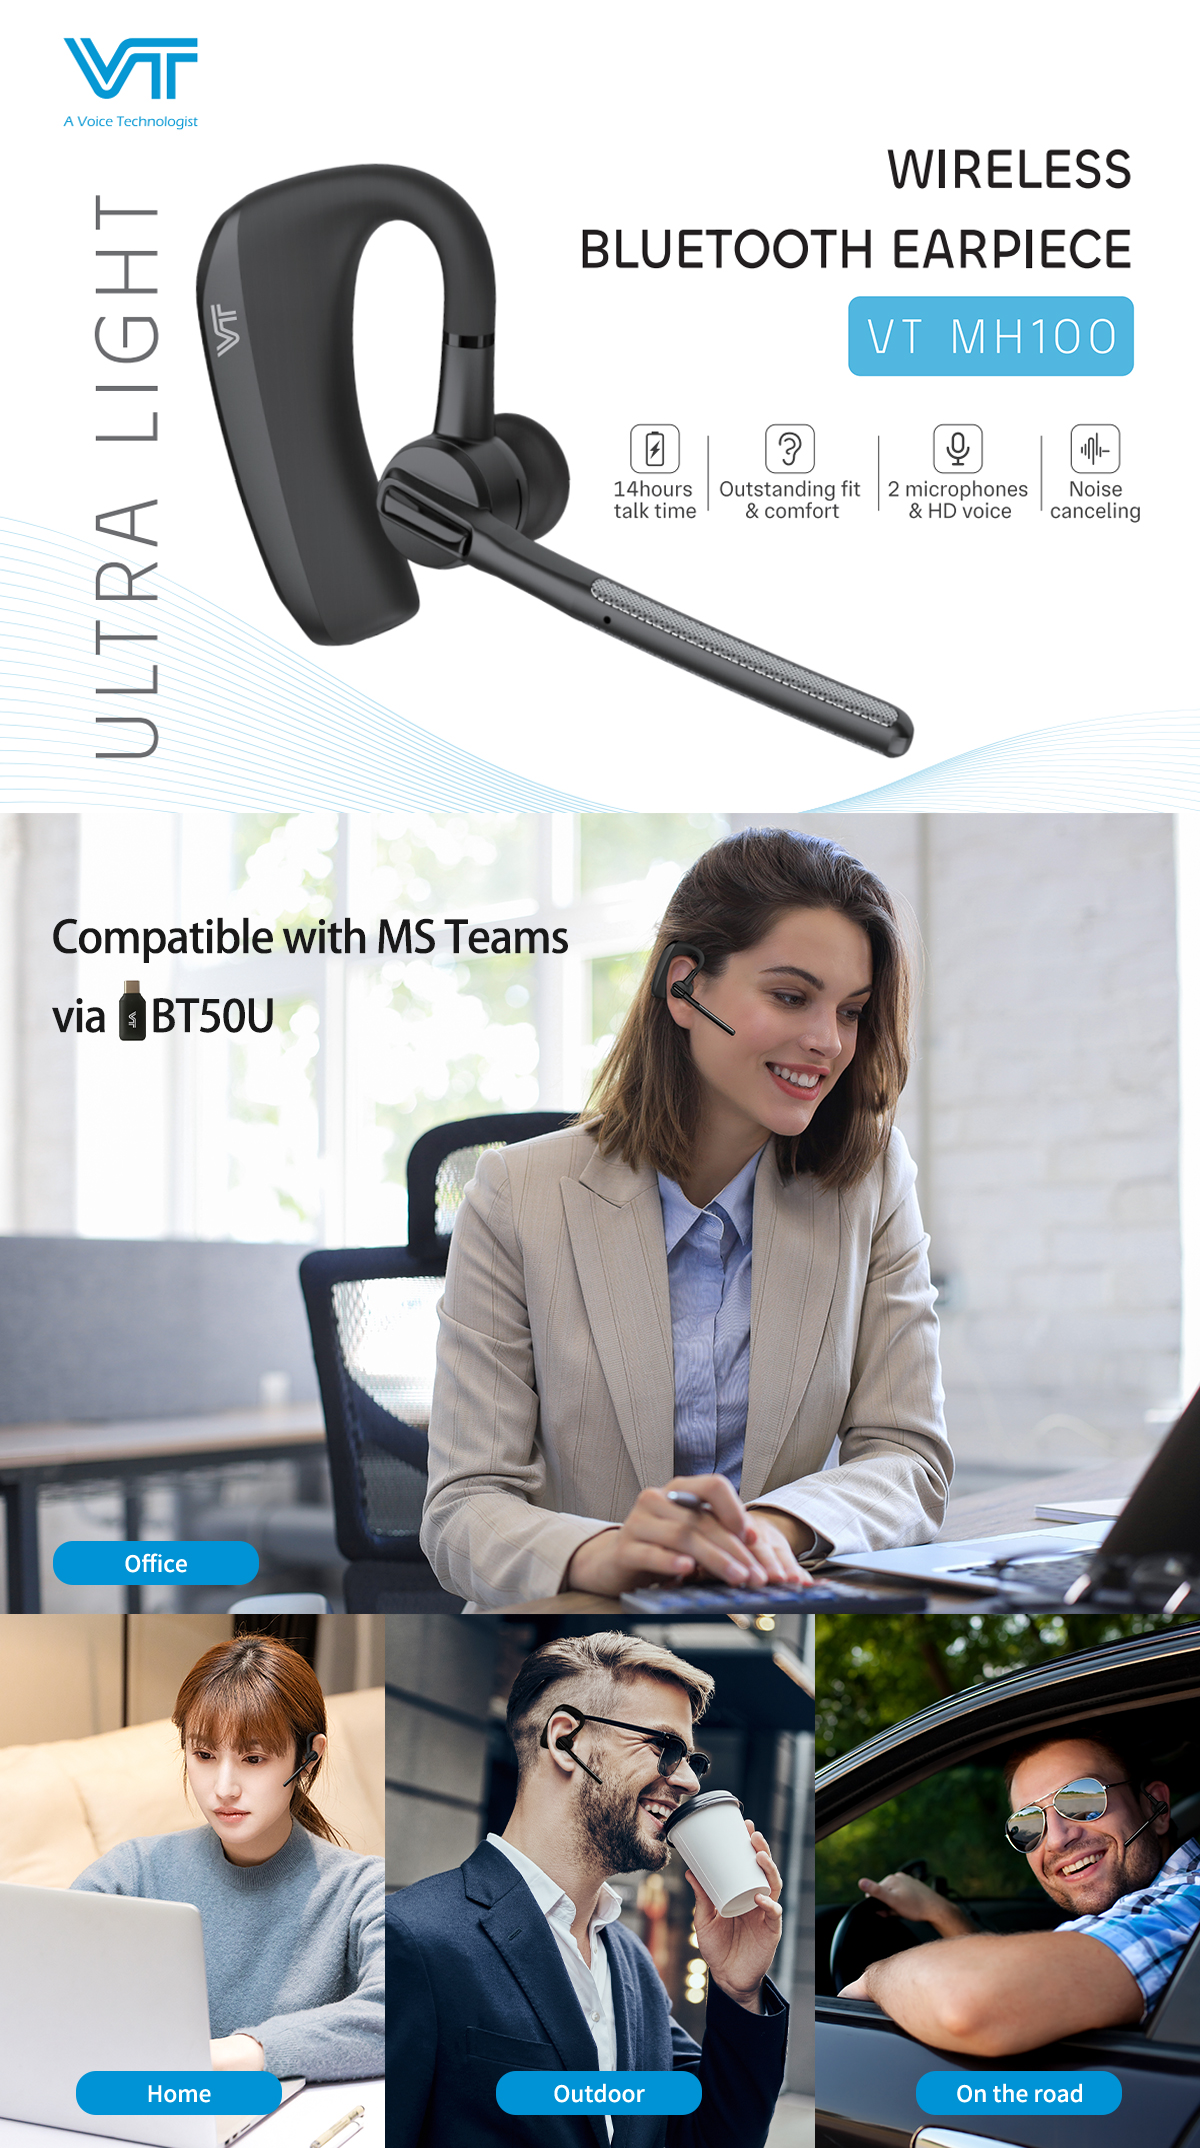 Introducing VT MH100: The Ultimate Wireless Bluetooth Earpiece